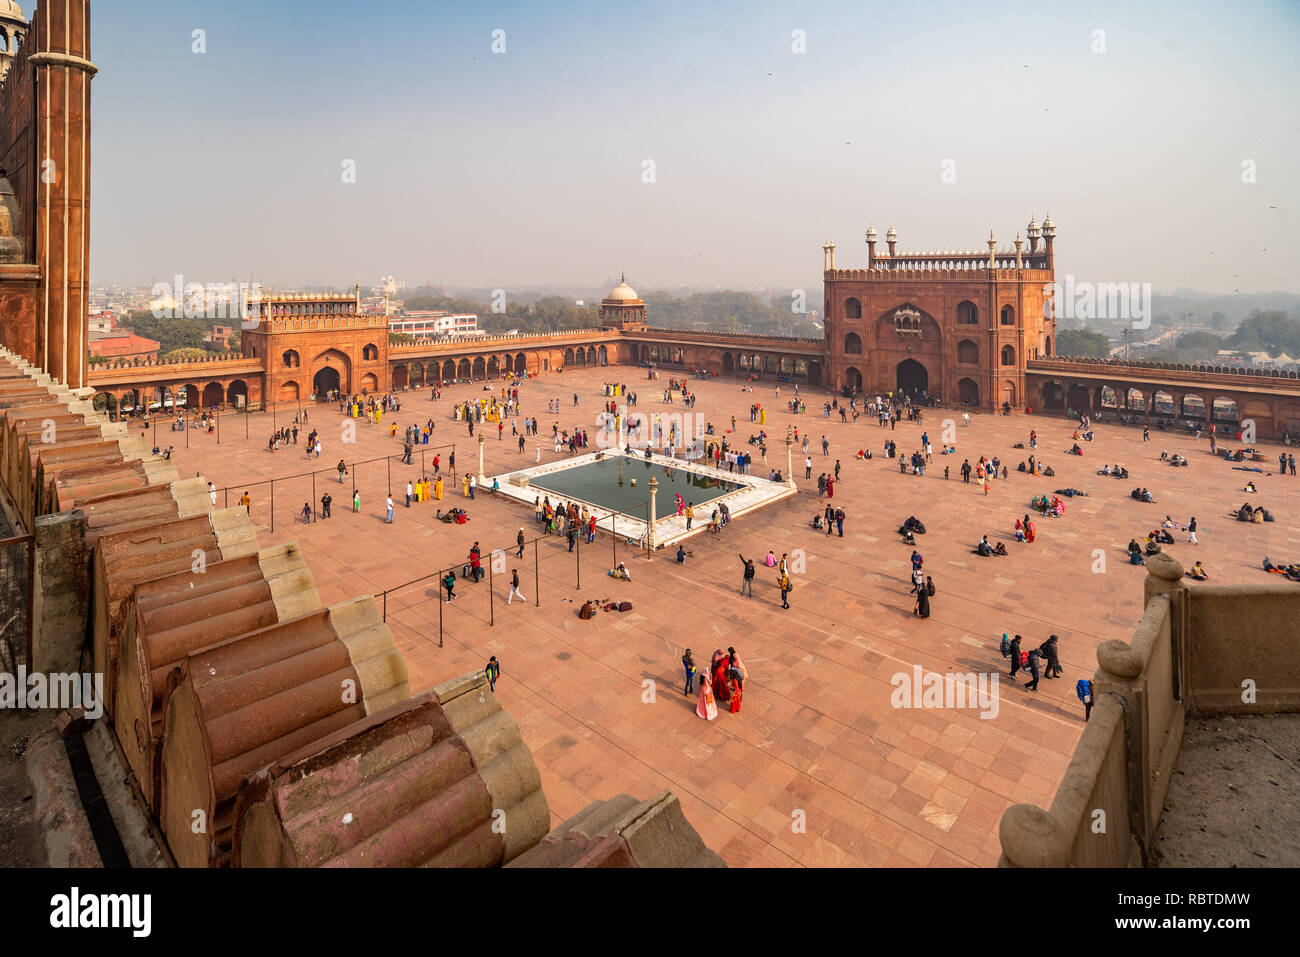 The main courtyard in Jama Masjid - a very famous mosque in Delhi, India Stock Photo